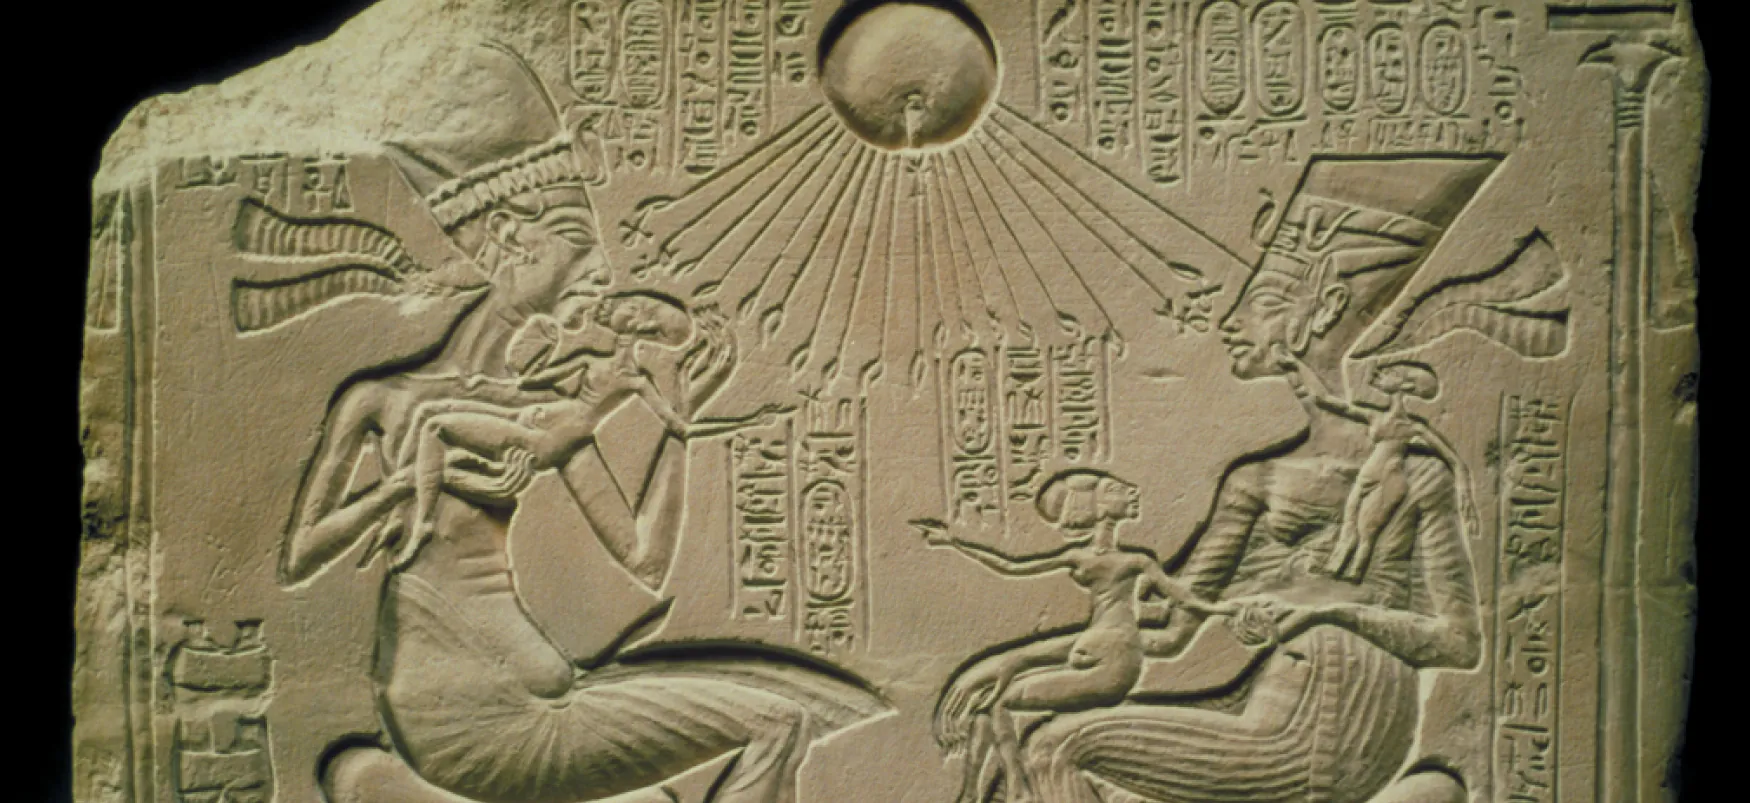 Stone fragment carved with images of two adults holding children. Above them is the sun, with rays reaching down to touch the adults and the children. Egyptian hieroglyphs surround the images.